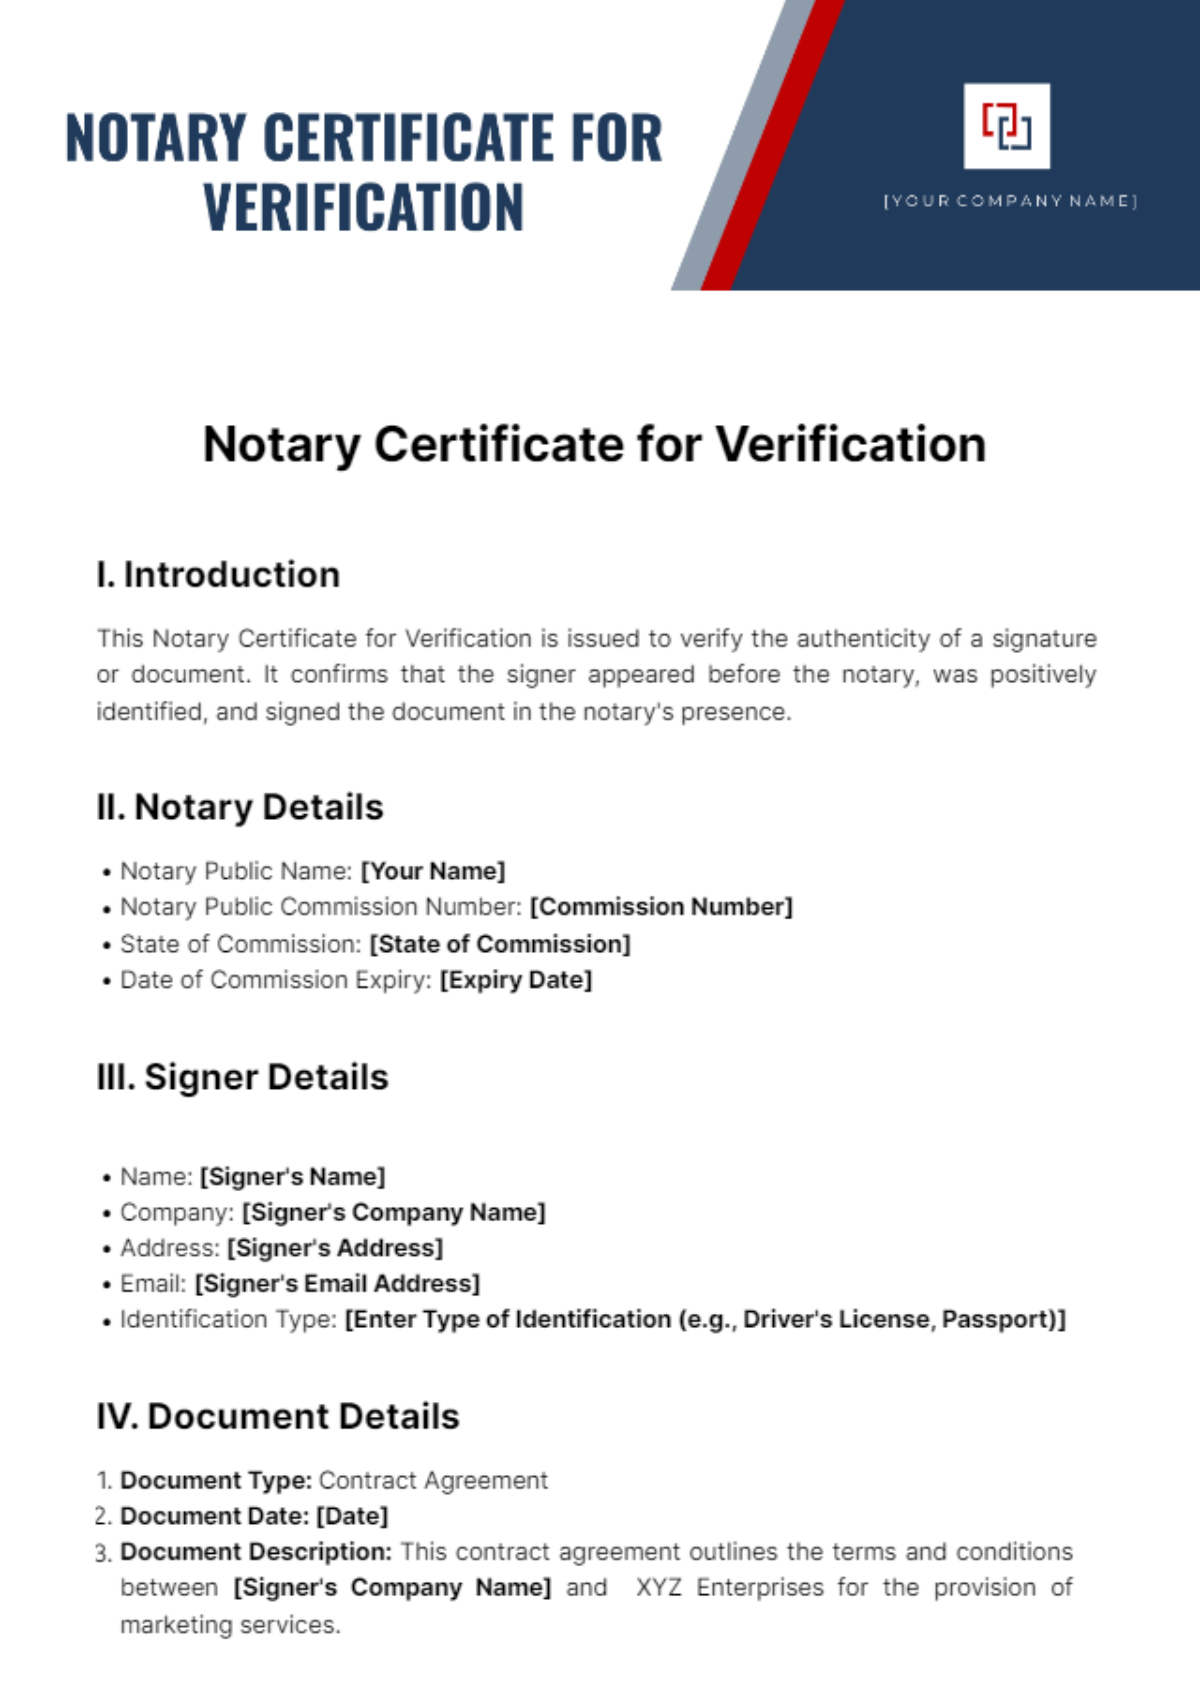 Notary Certificate For Verification Template